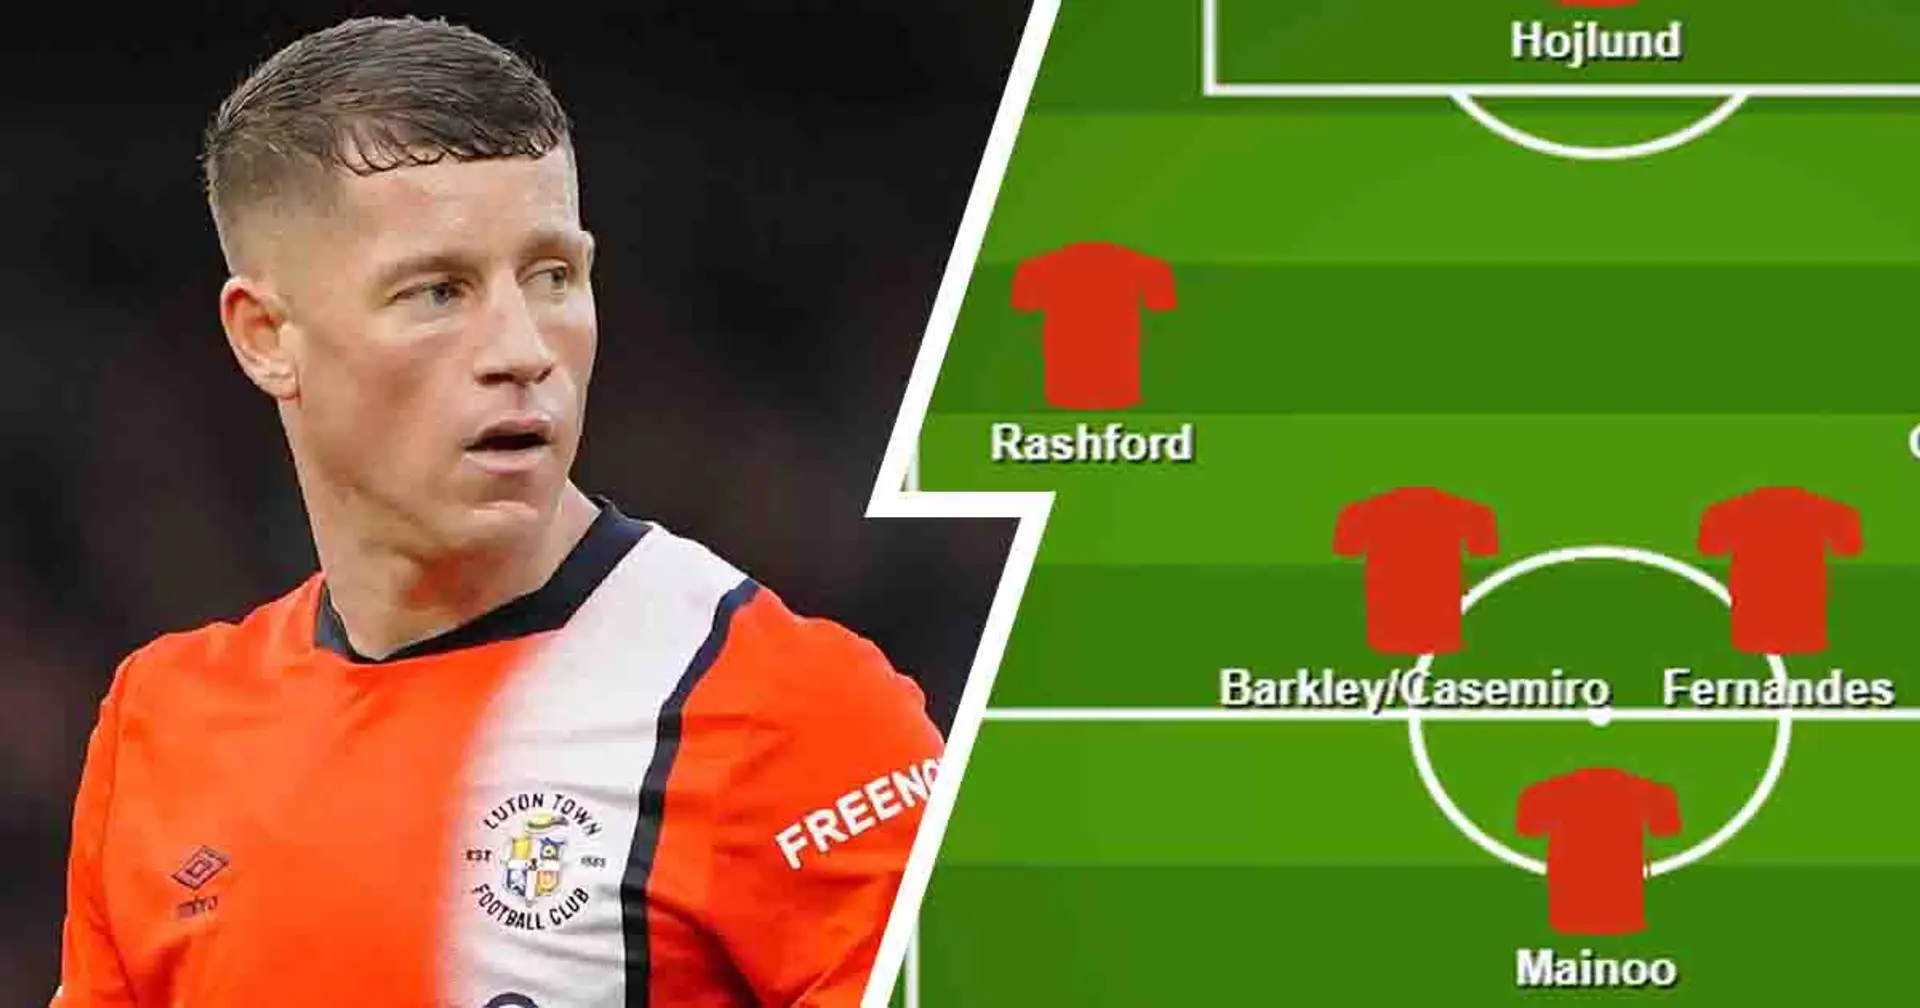 Two ways Man United could potentially line up with Ross Barkley next season - shown in pics